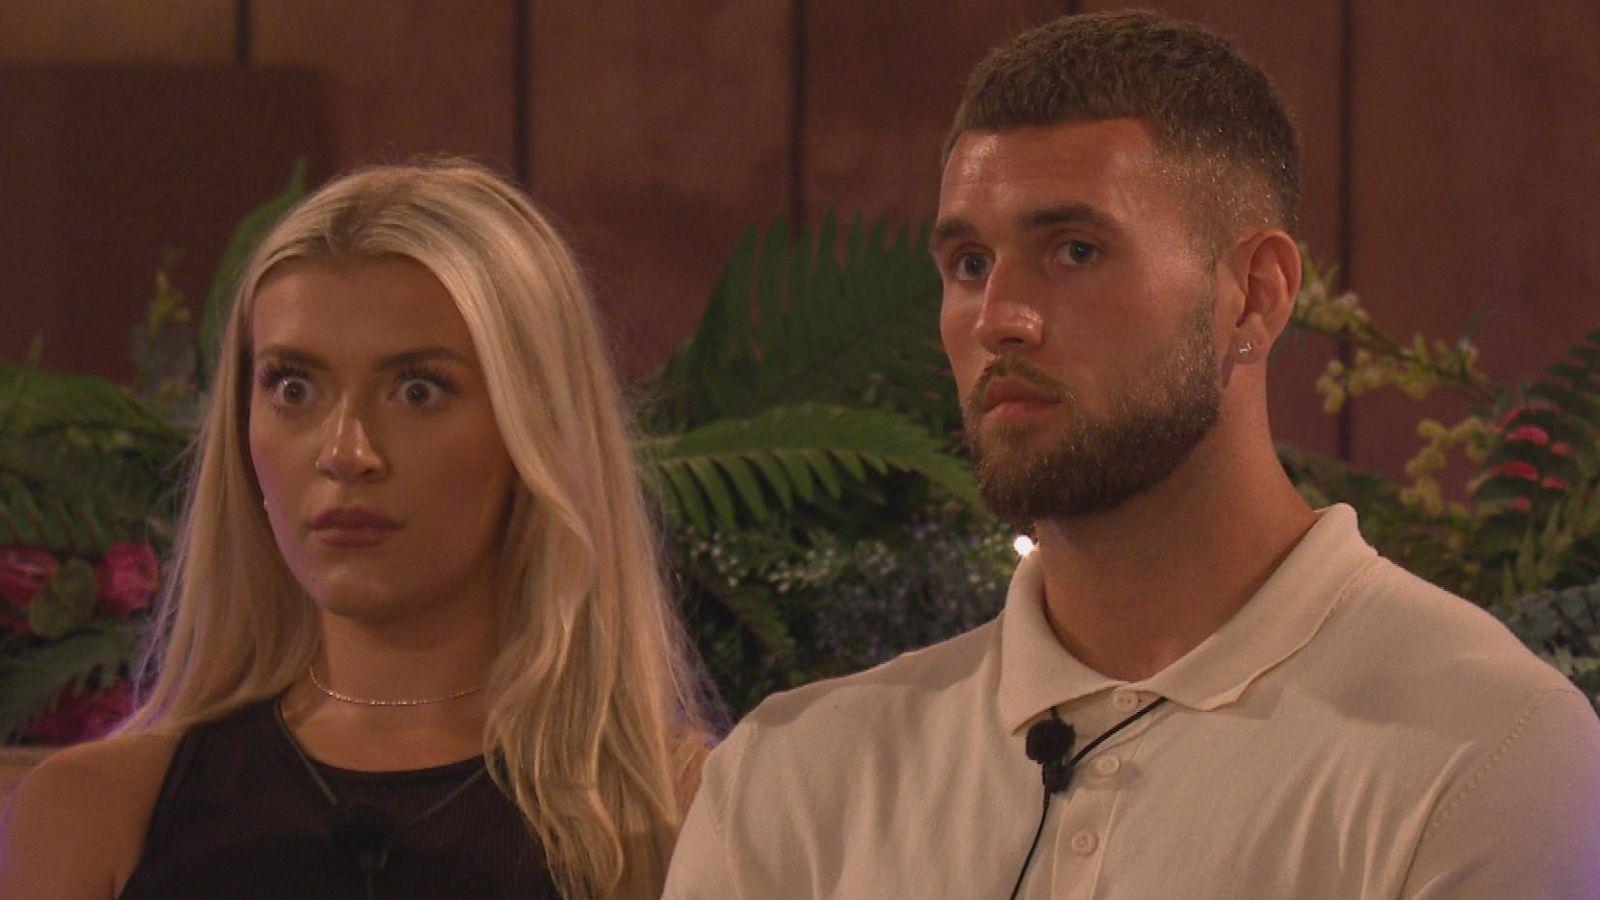 Love Island couple Molly and Zachariah sitting together